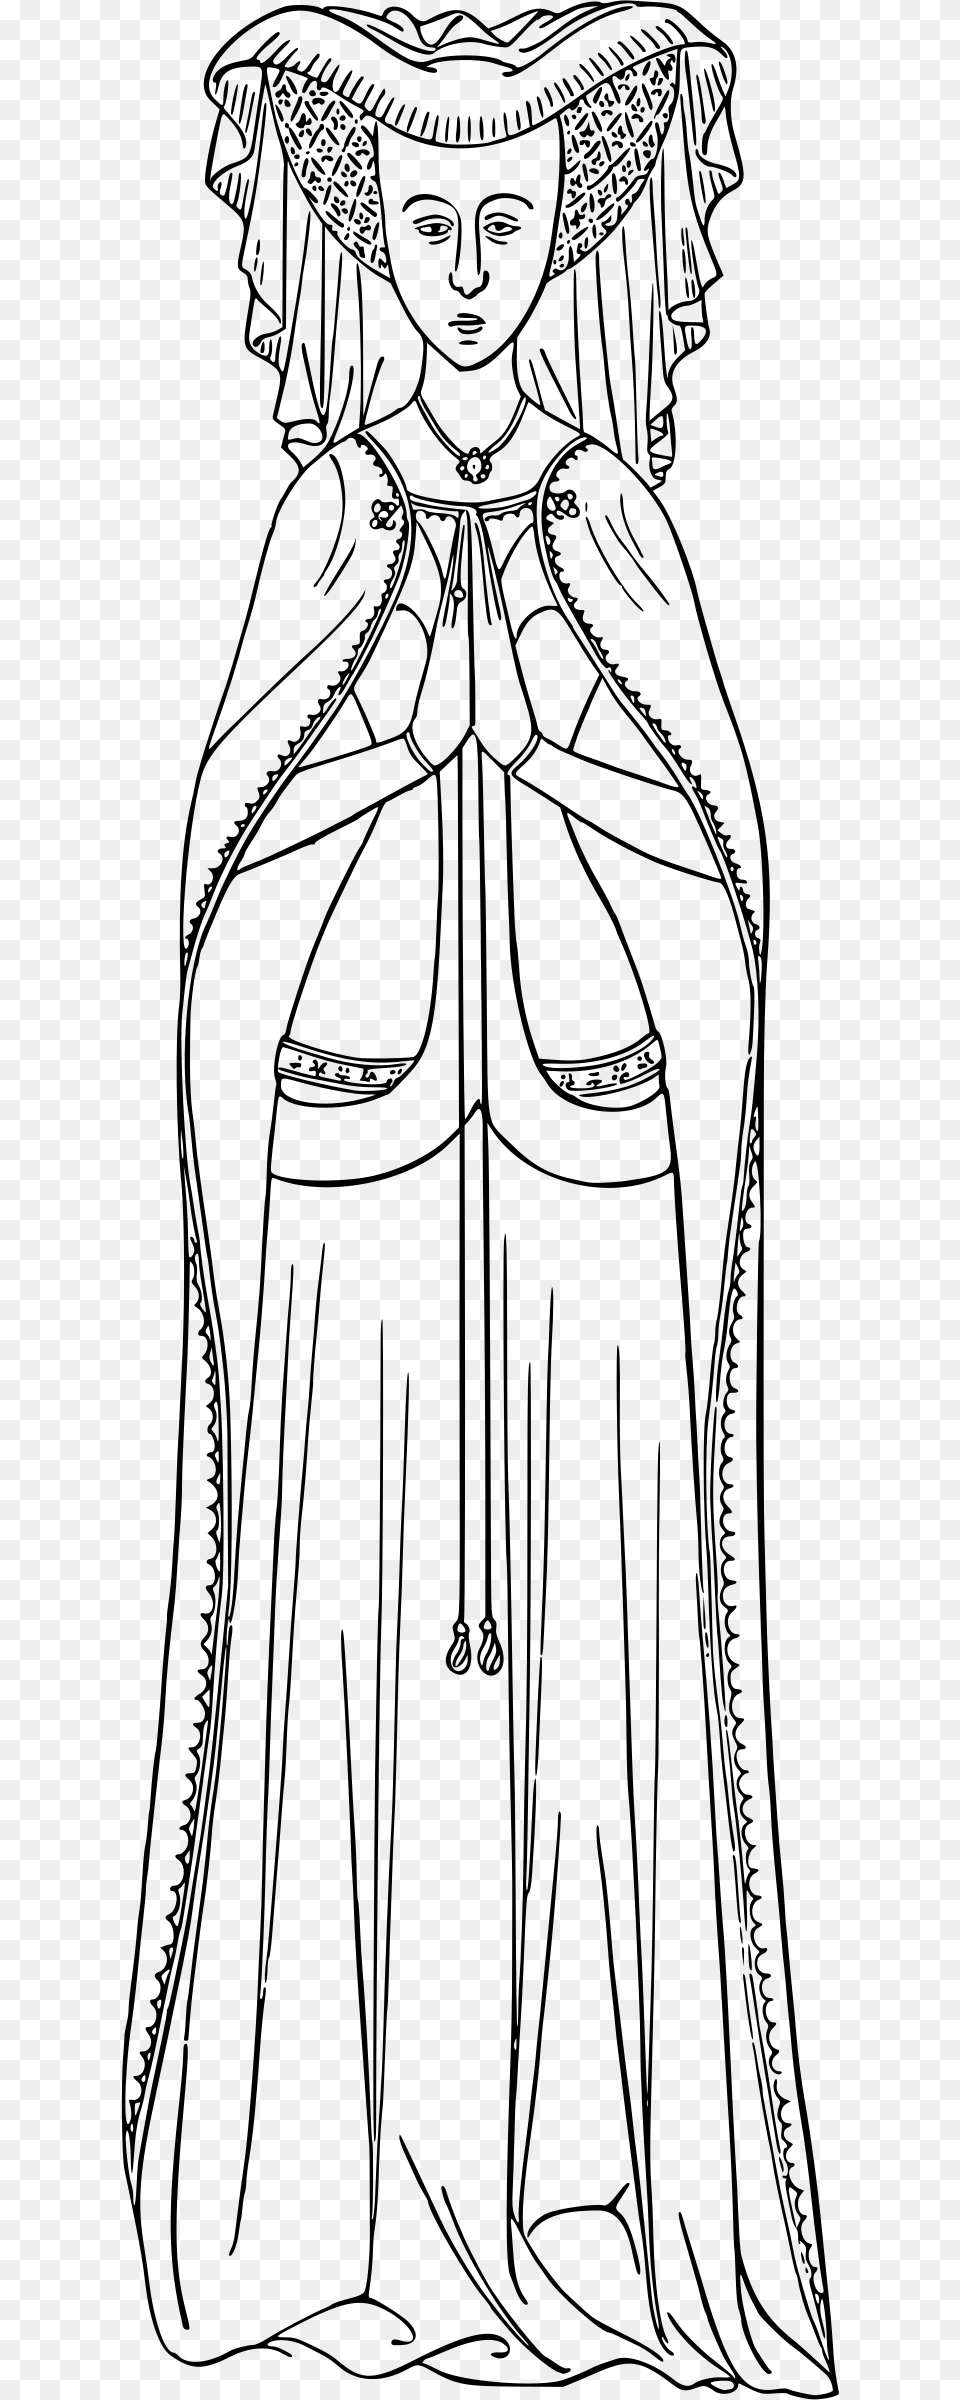 This Icons Design Of Praying Lady, Gray Free Transparent Png